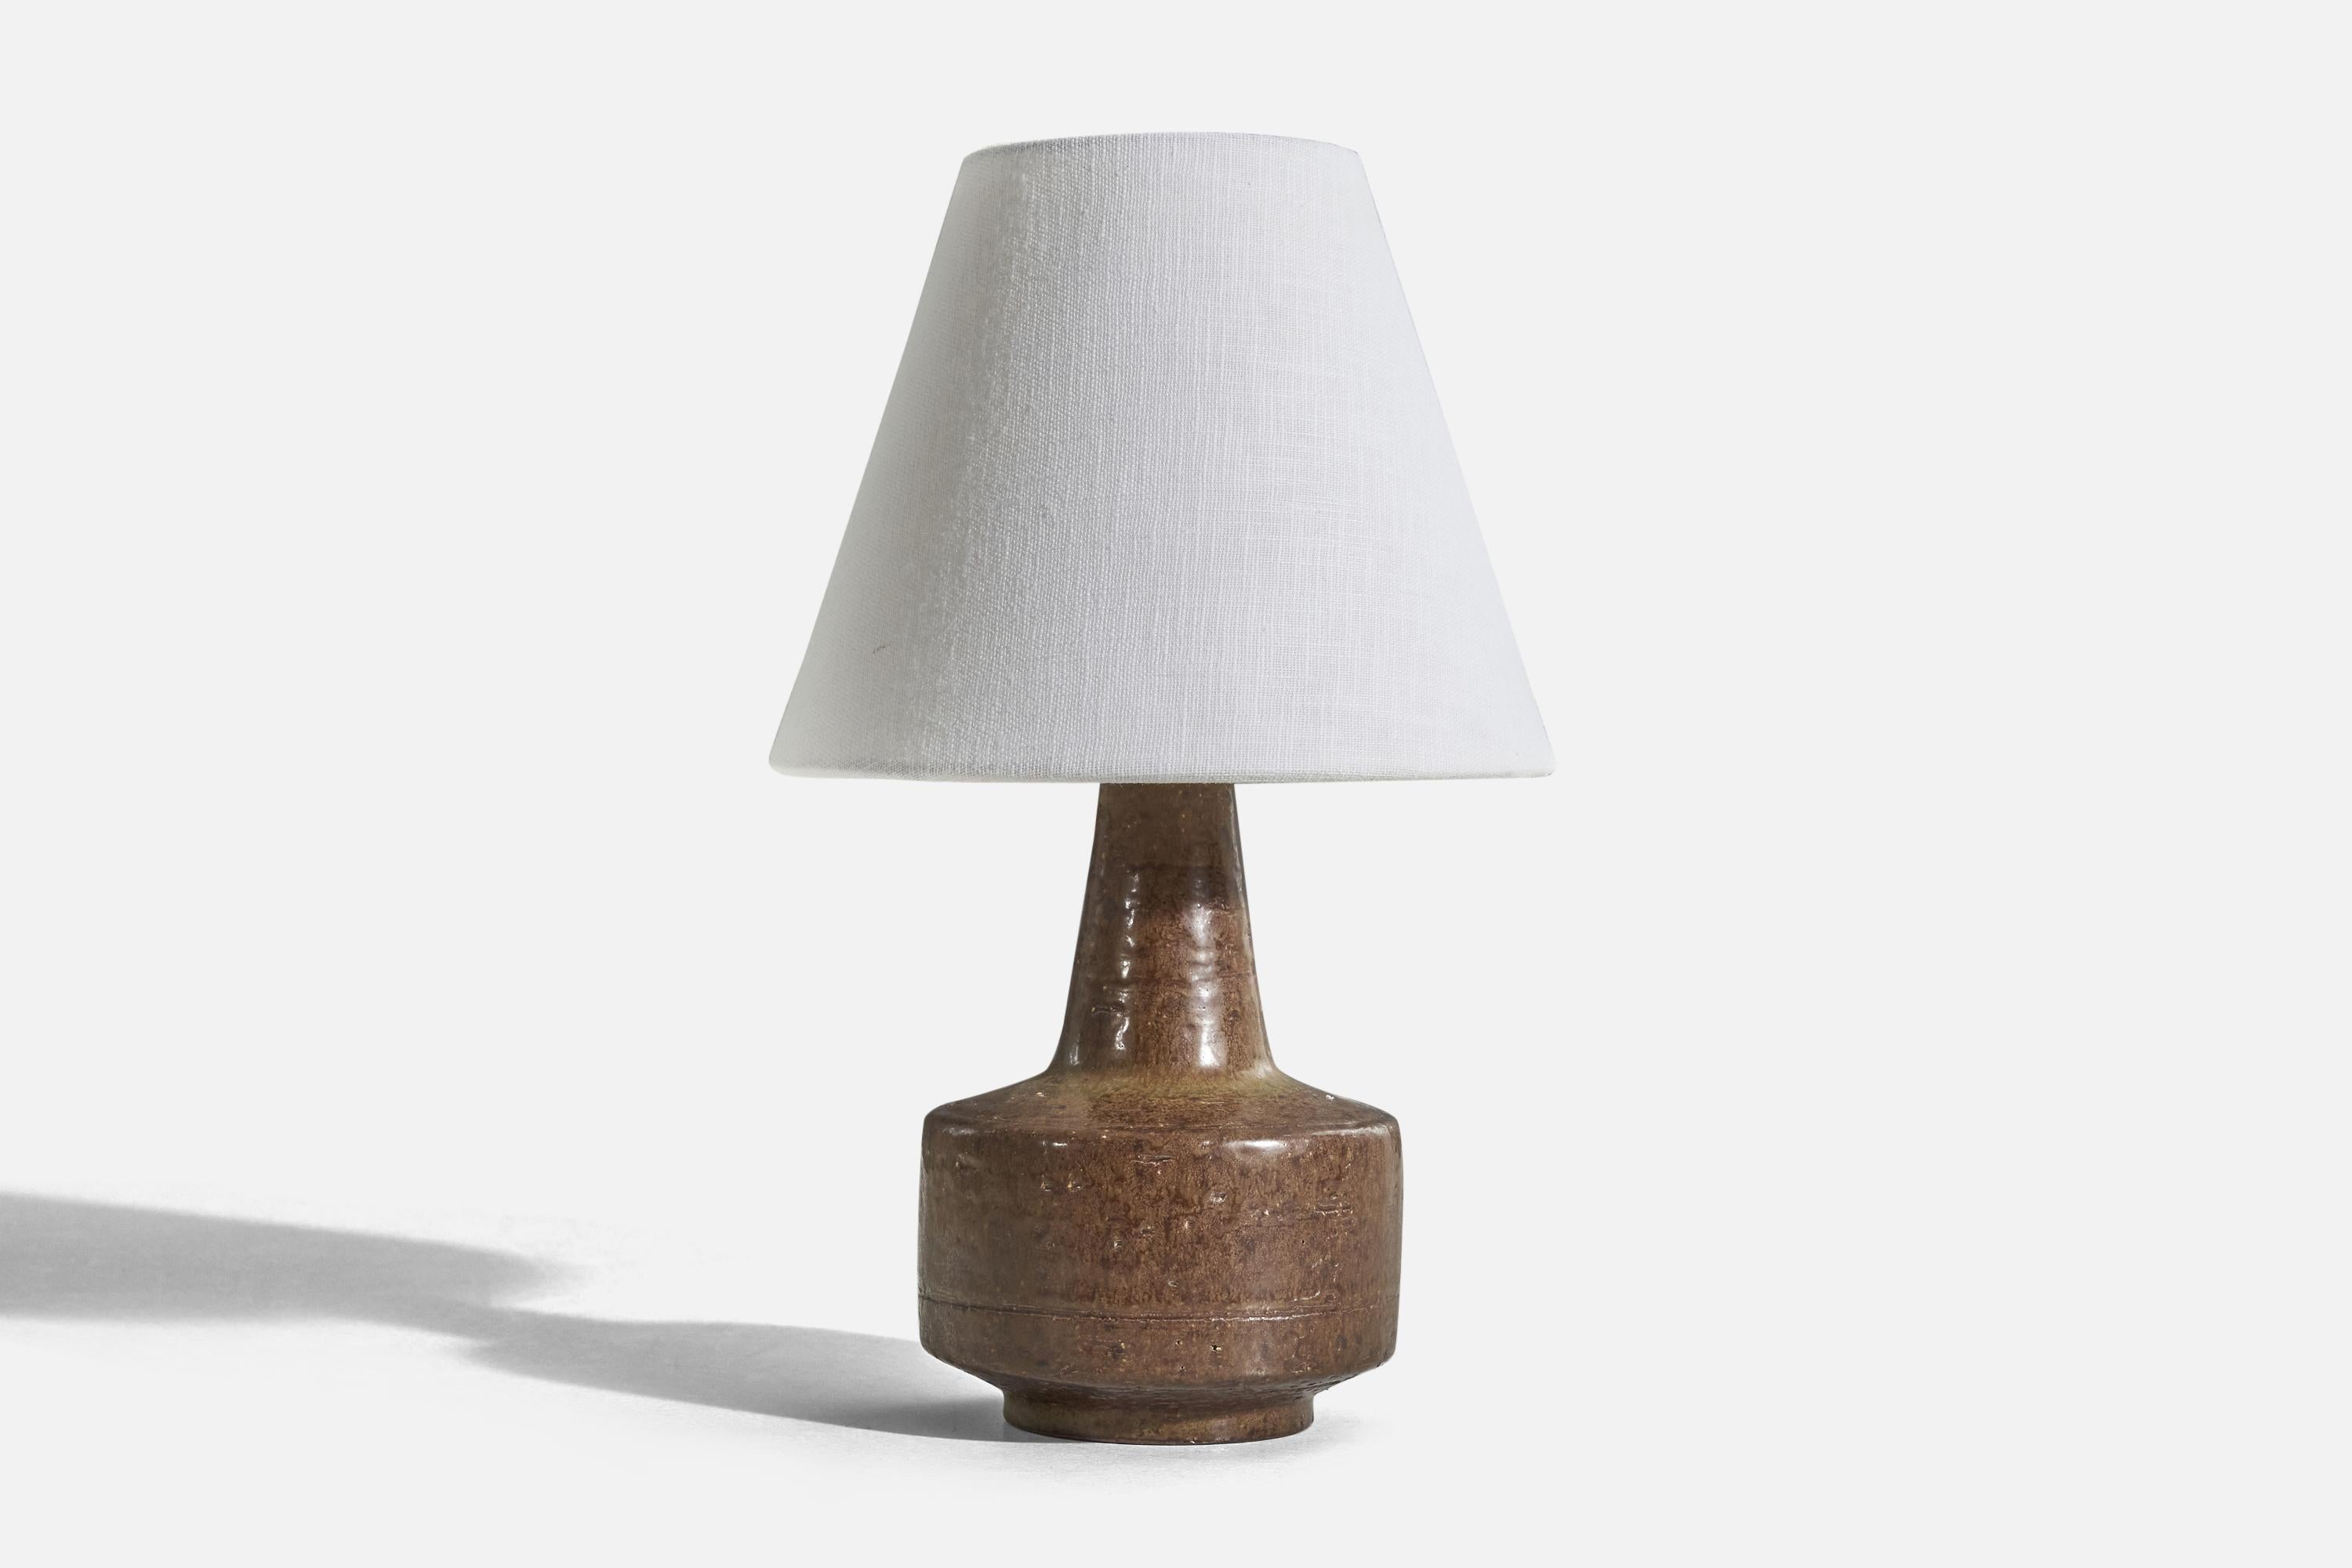 A brown, glazed stoneware table lamp designed by Per Linneman-Schmidt and produced by Palshus, Sengeløse, Denmark, c. 1960s.

Sold without lampshade. 
Dimensions of Lamp (inches) : 10.56 x 5.12 x 5.12 (H x W x D)
Dimensions of Shade (inches) : 4